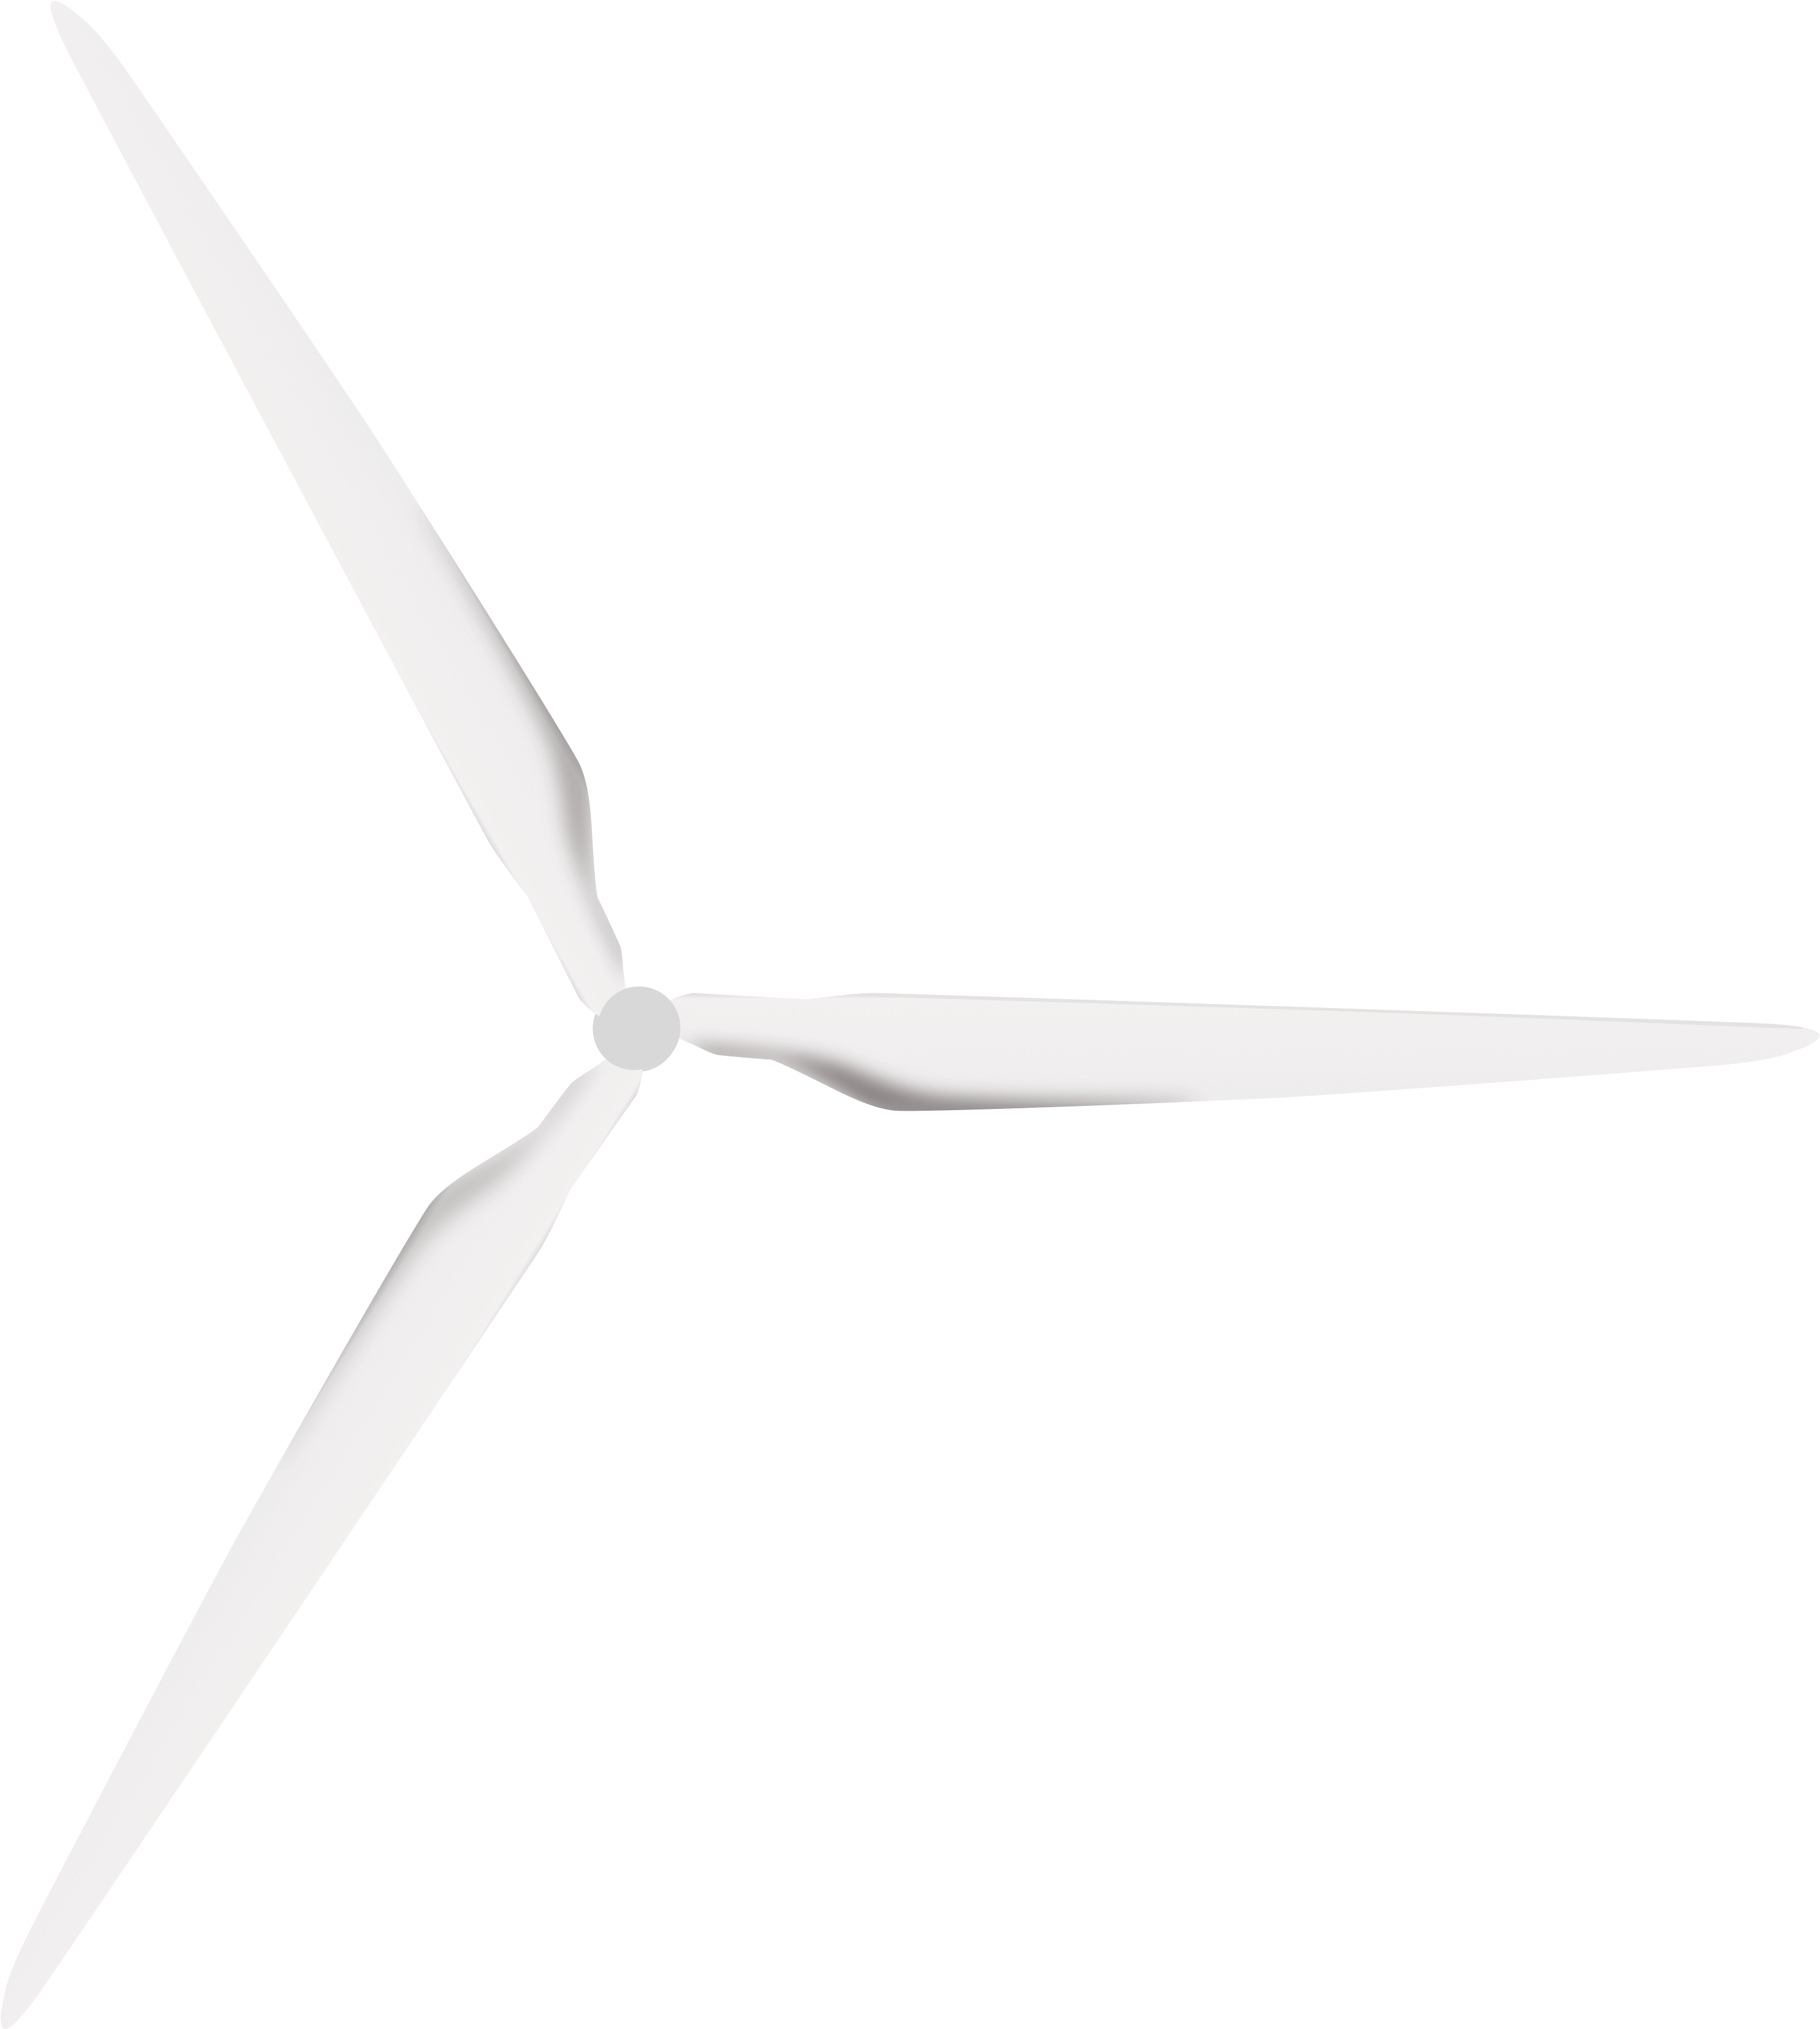 A White Propeller On A Black Background